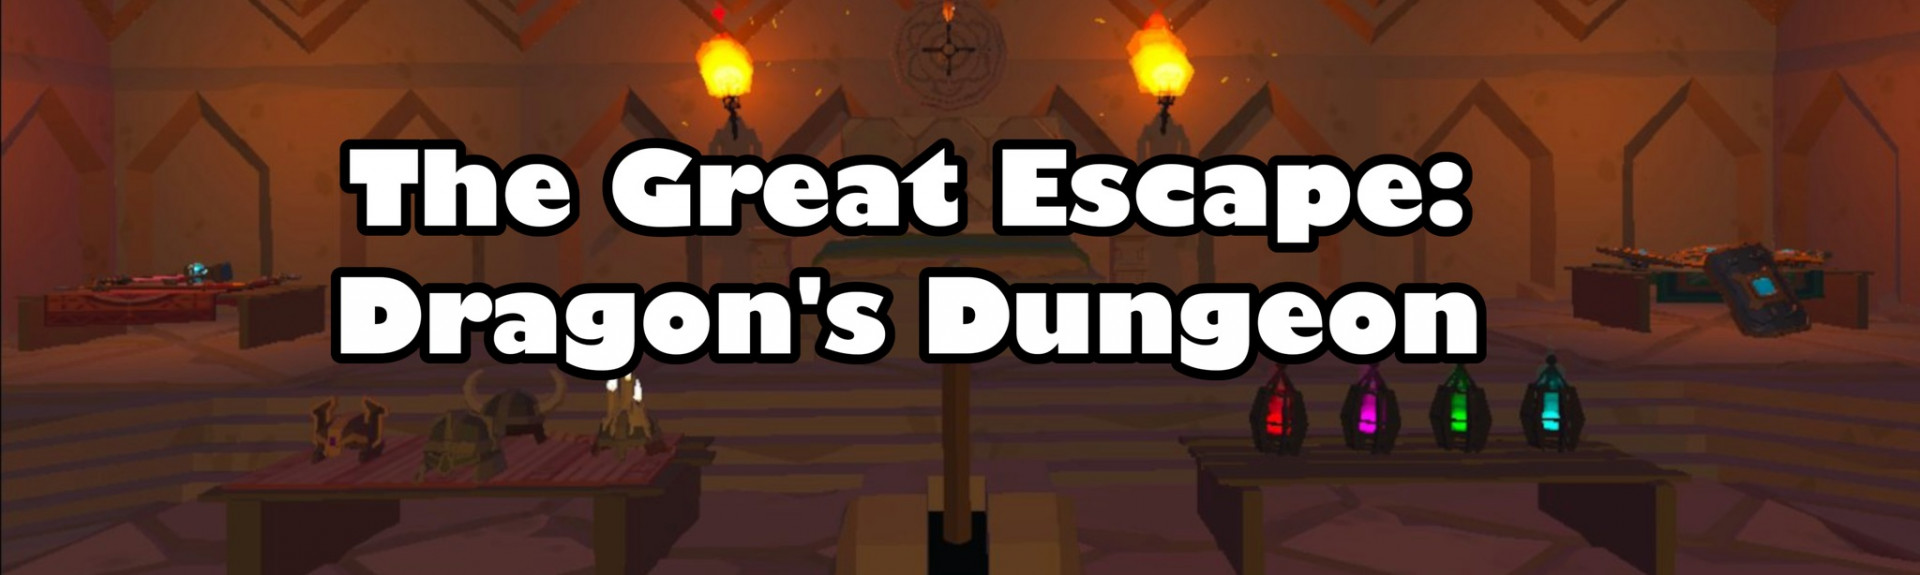 The Great Escape: Dragon’s Dungeon